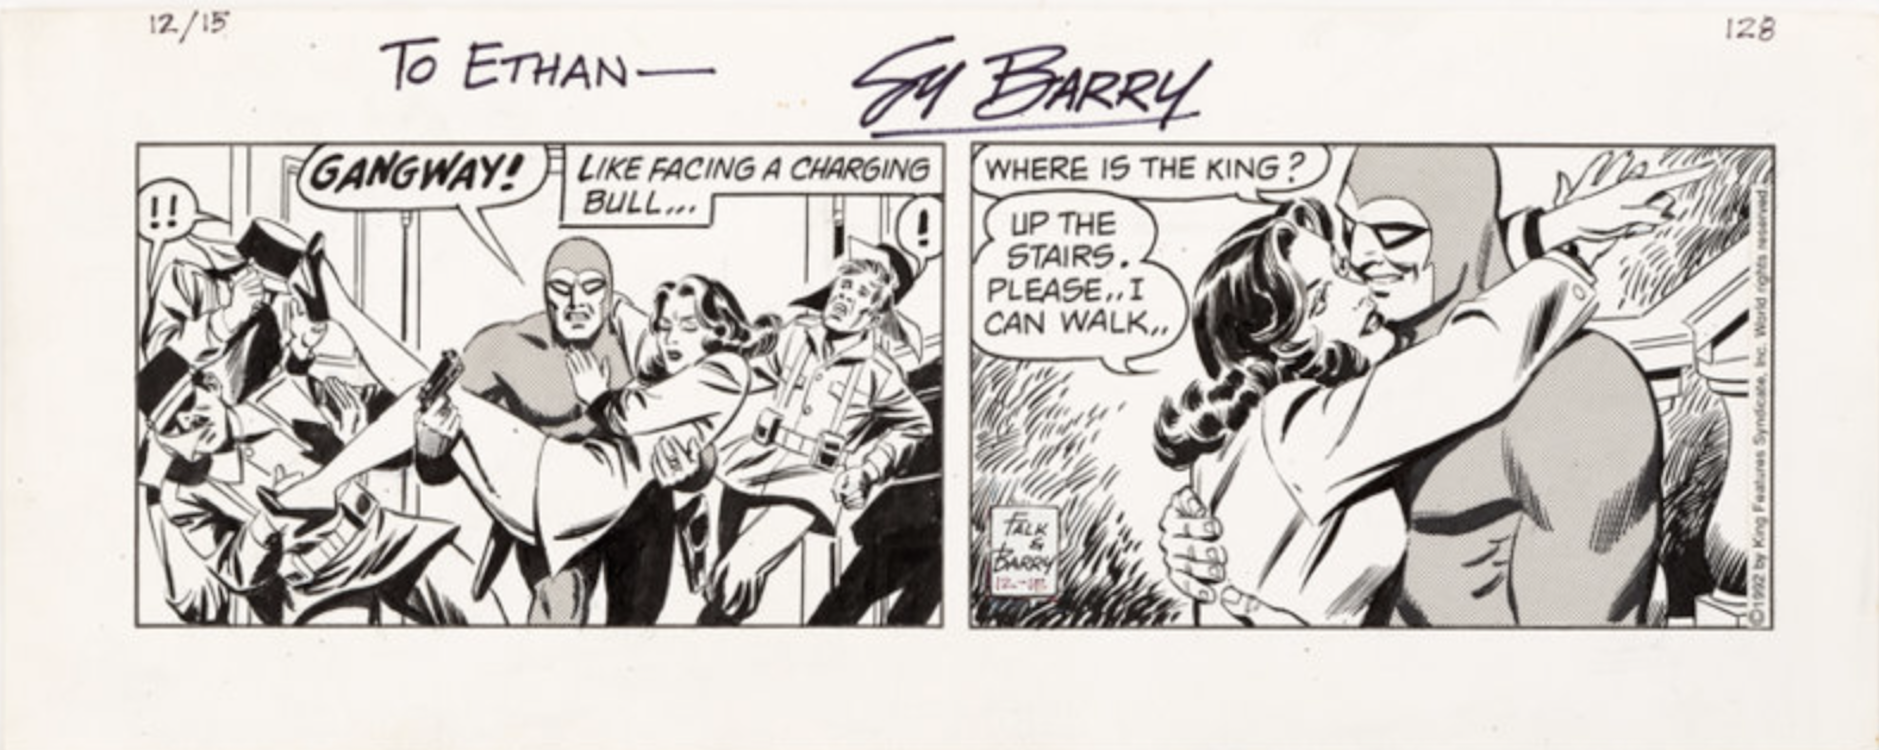 The Phantom Daily Comic Strip 12-15-92 by Sy Barry sold for $310. Click here to get your original art appraised.